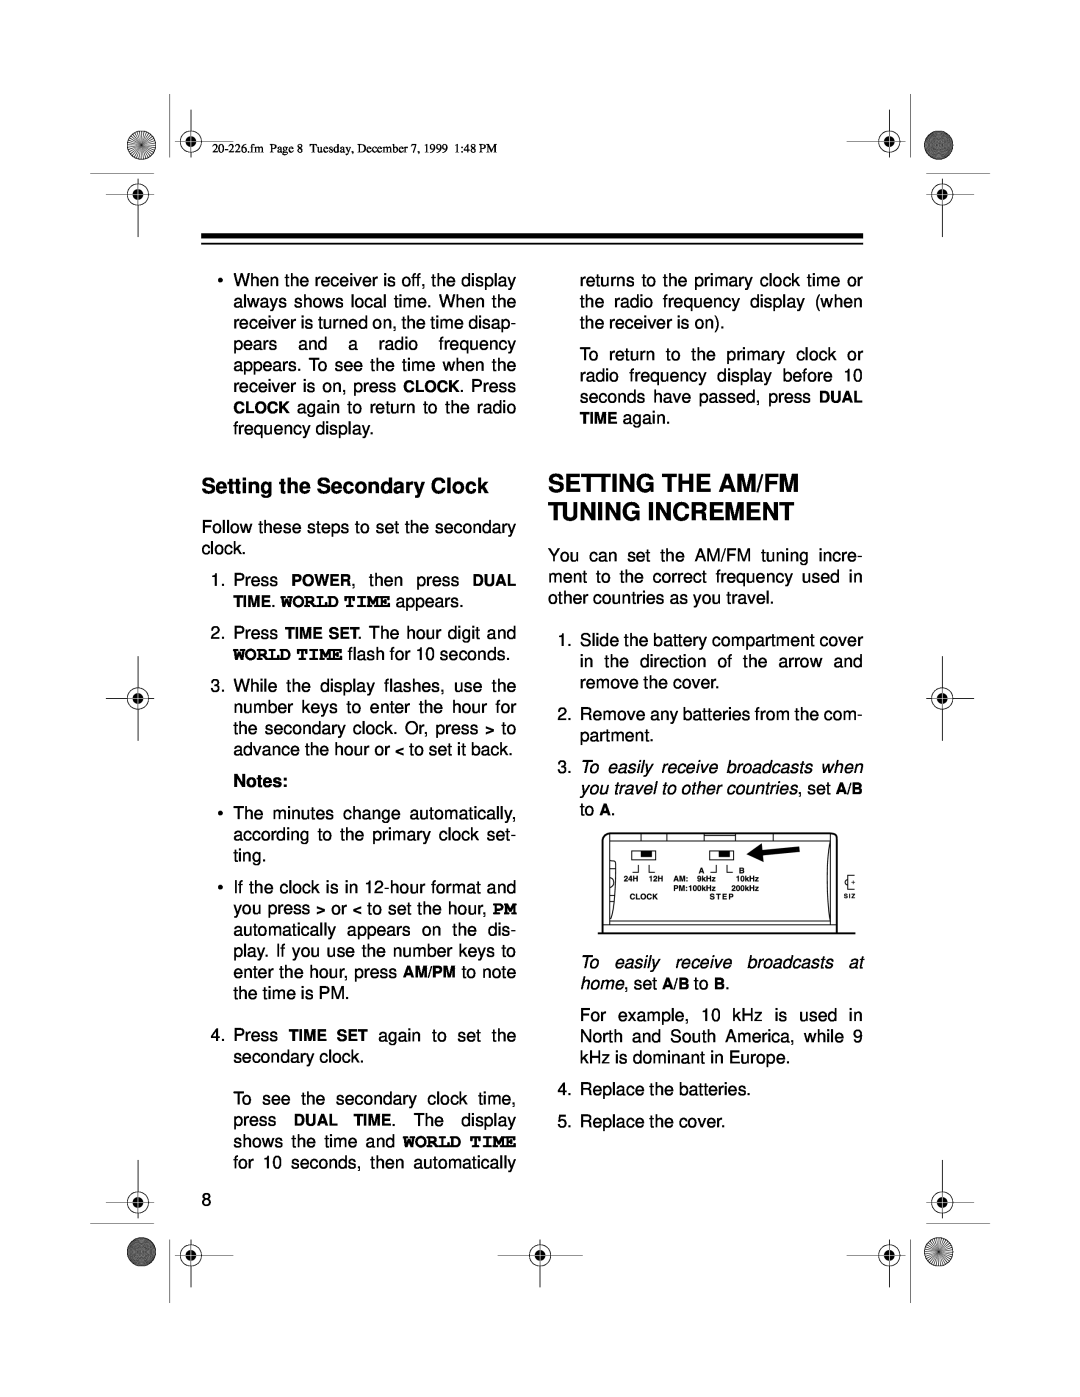 Radio Shack DX-396 owner manual Setting the Secondary Clock, Setting The Am/Fm Tuning Increment 